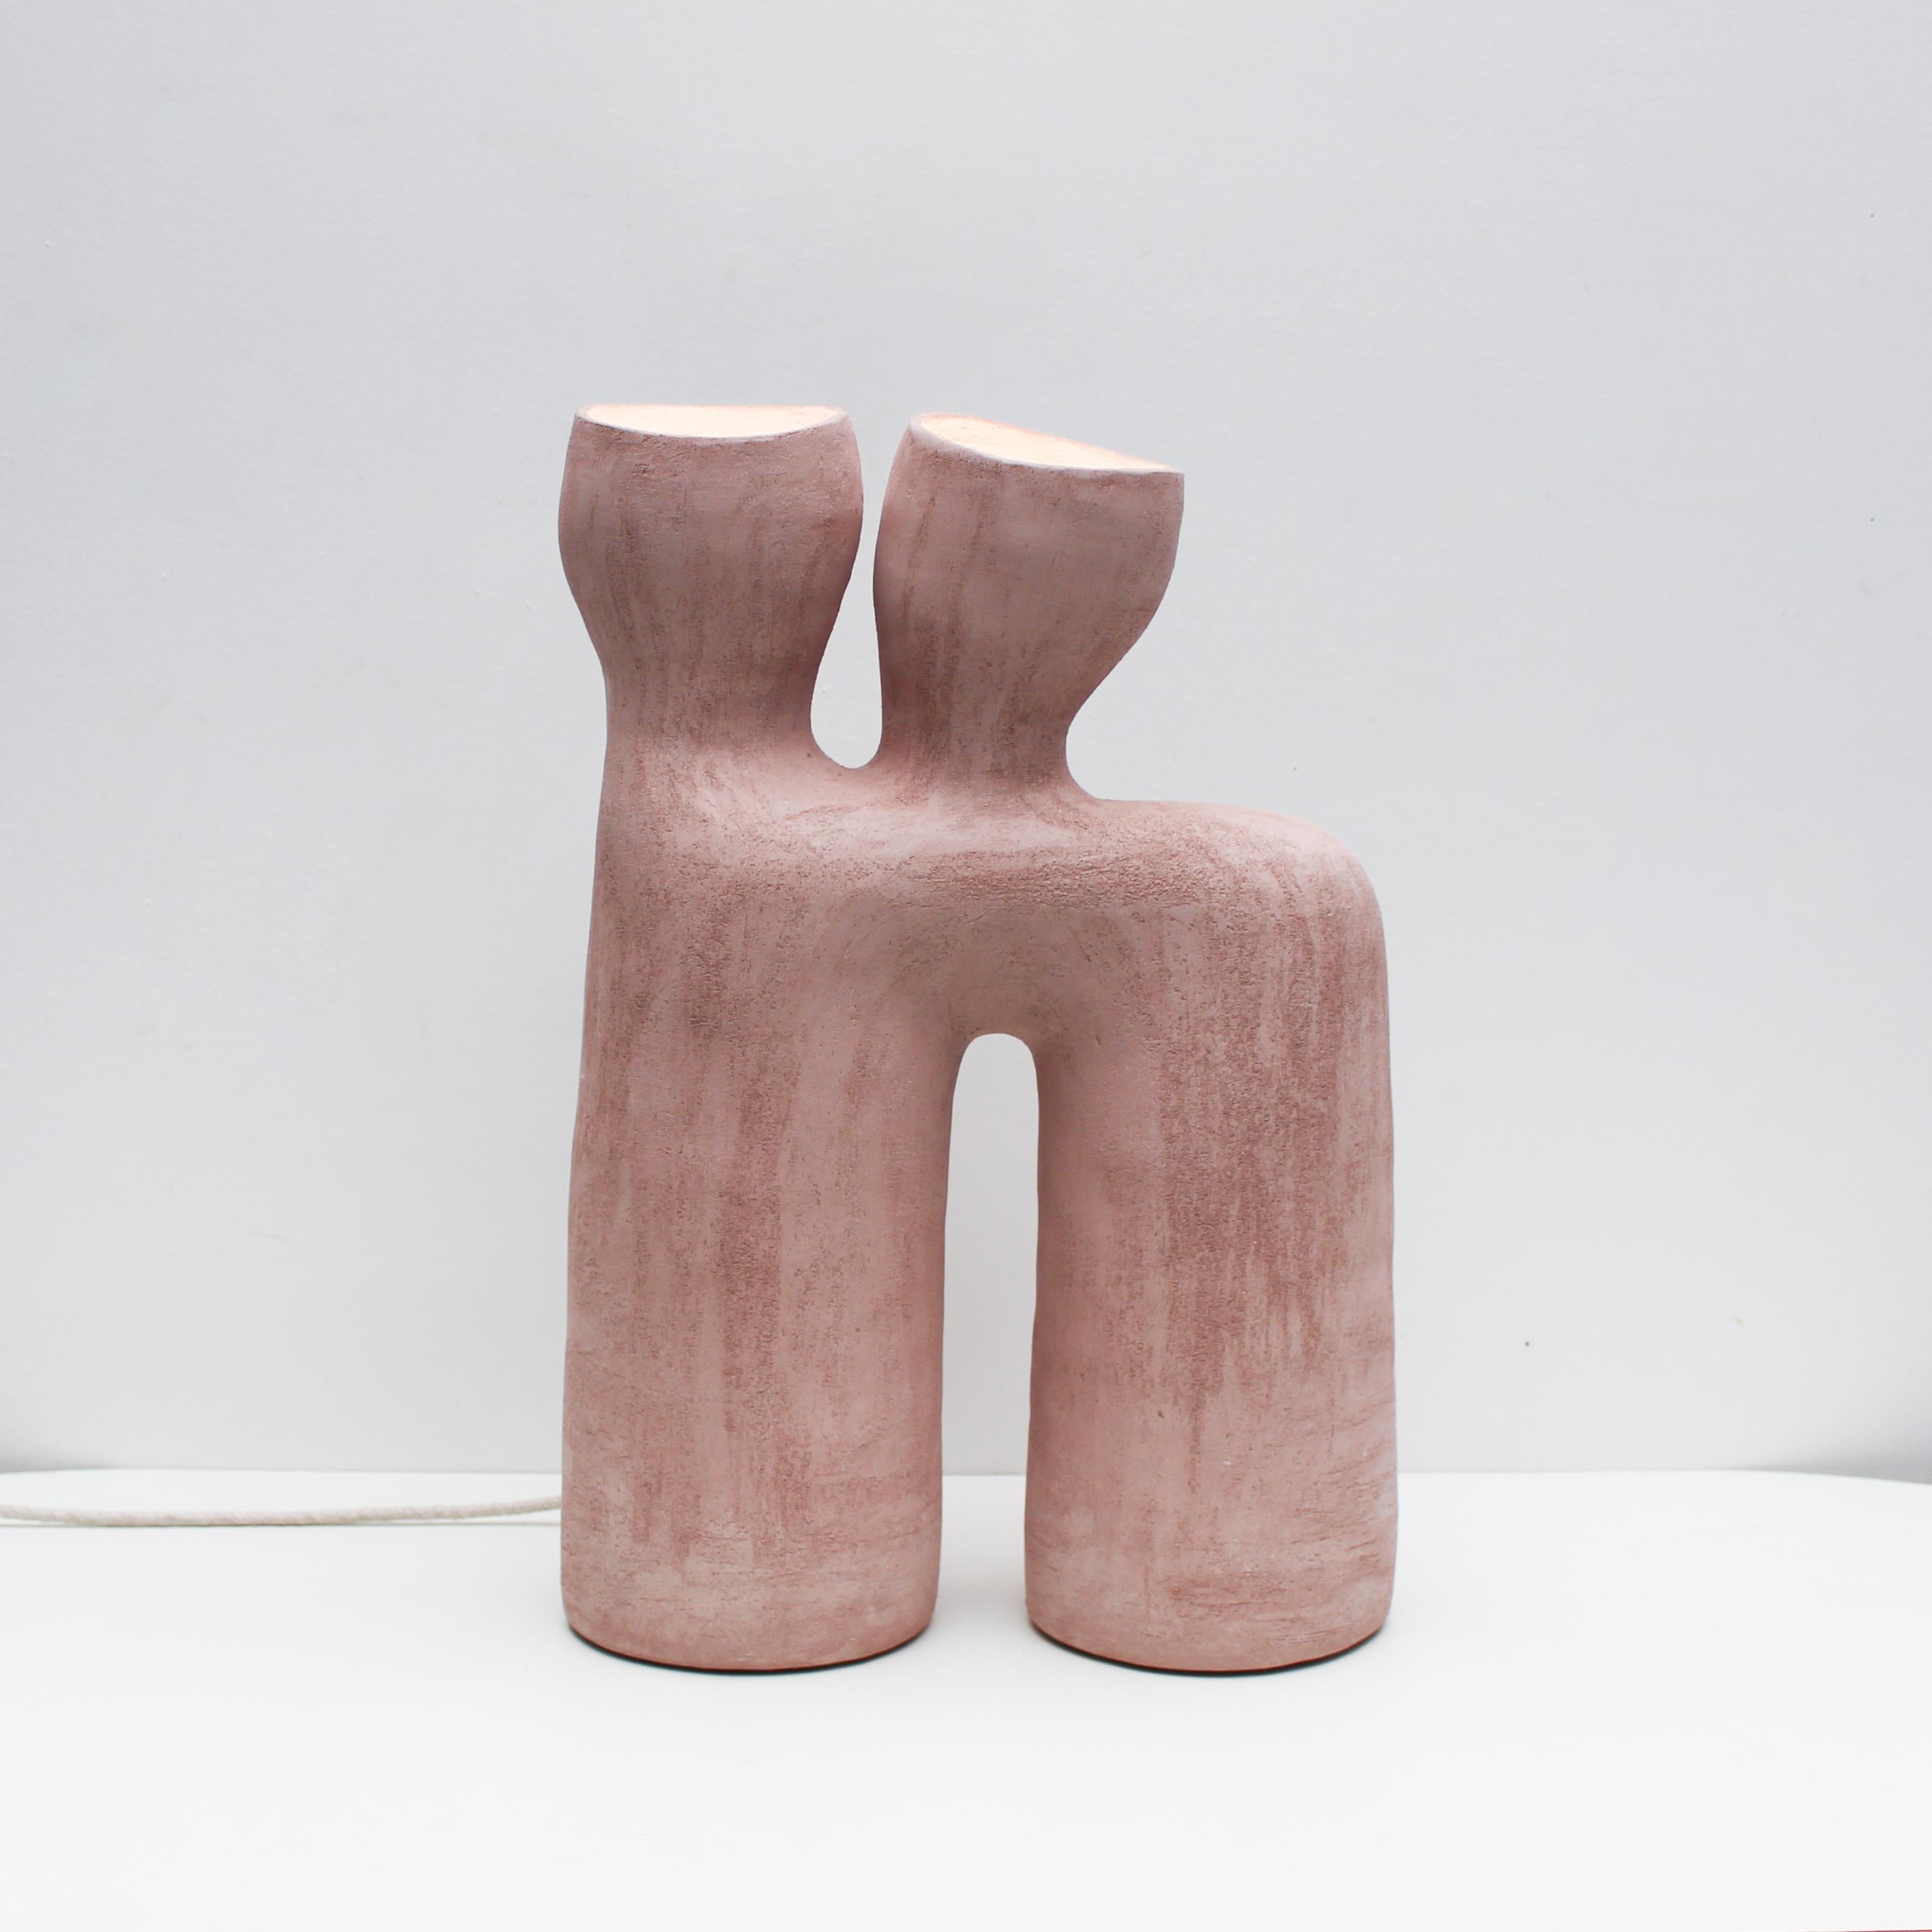 Opéra pink stoneware table lamp by Elisa Uberti
Materials: Pink Stoneware
Dimensions: 55 x 36 x 17 cm

After fifteen years in fashion, Elisa Uberti decides to take the time to work with these hands and to give birth to new projects.

Designer and